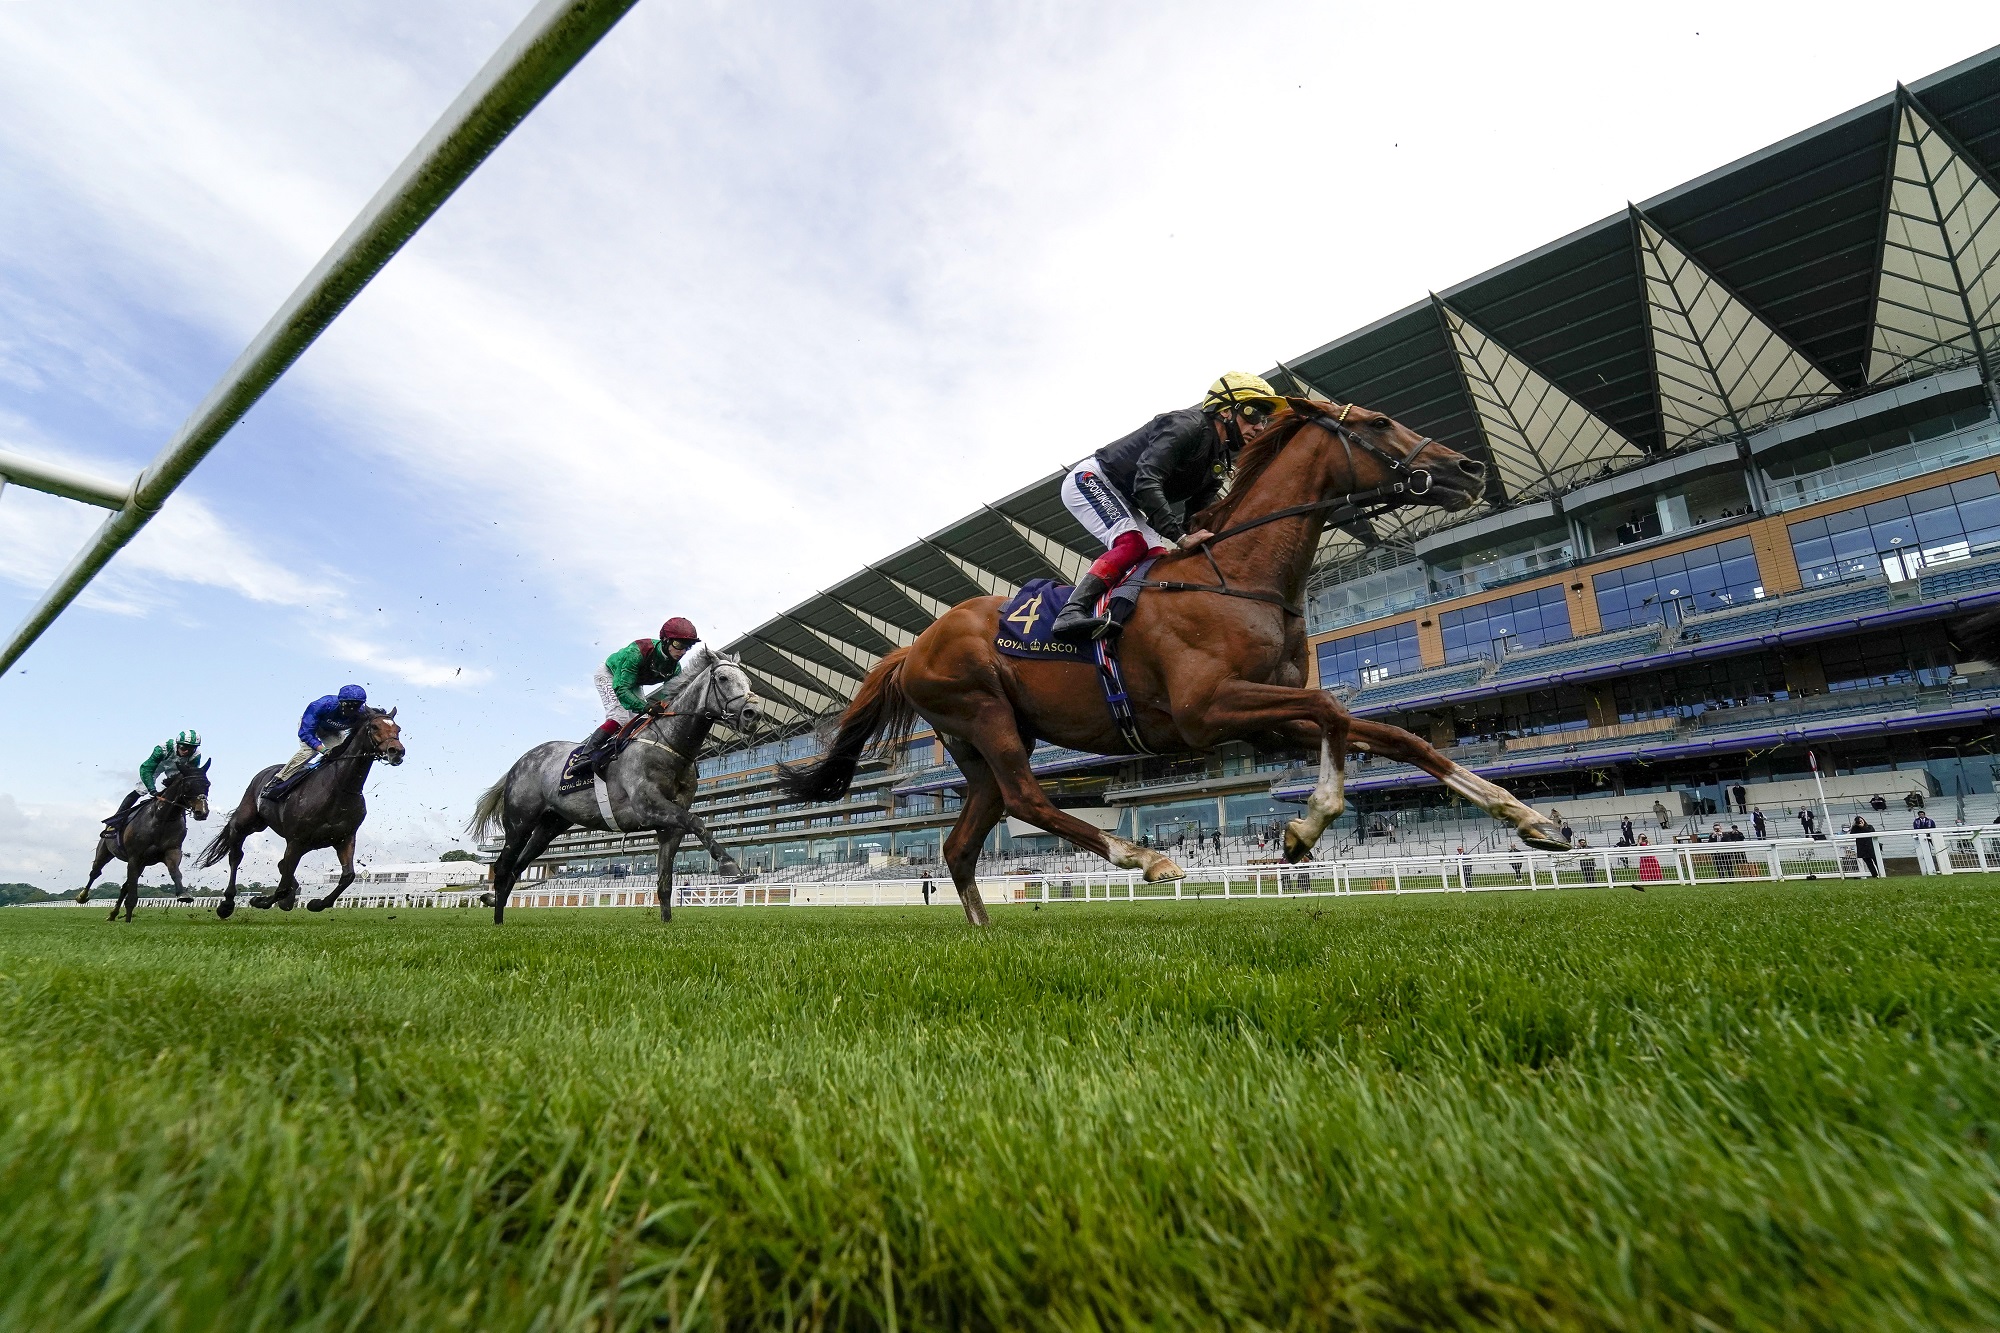 Four horse riders on horseback racing at Ascot race course.